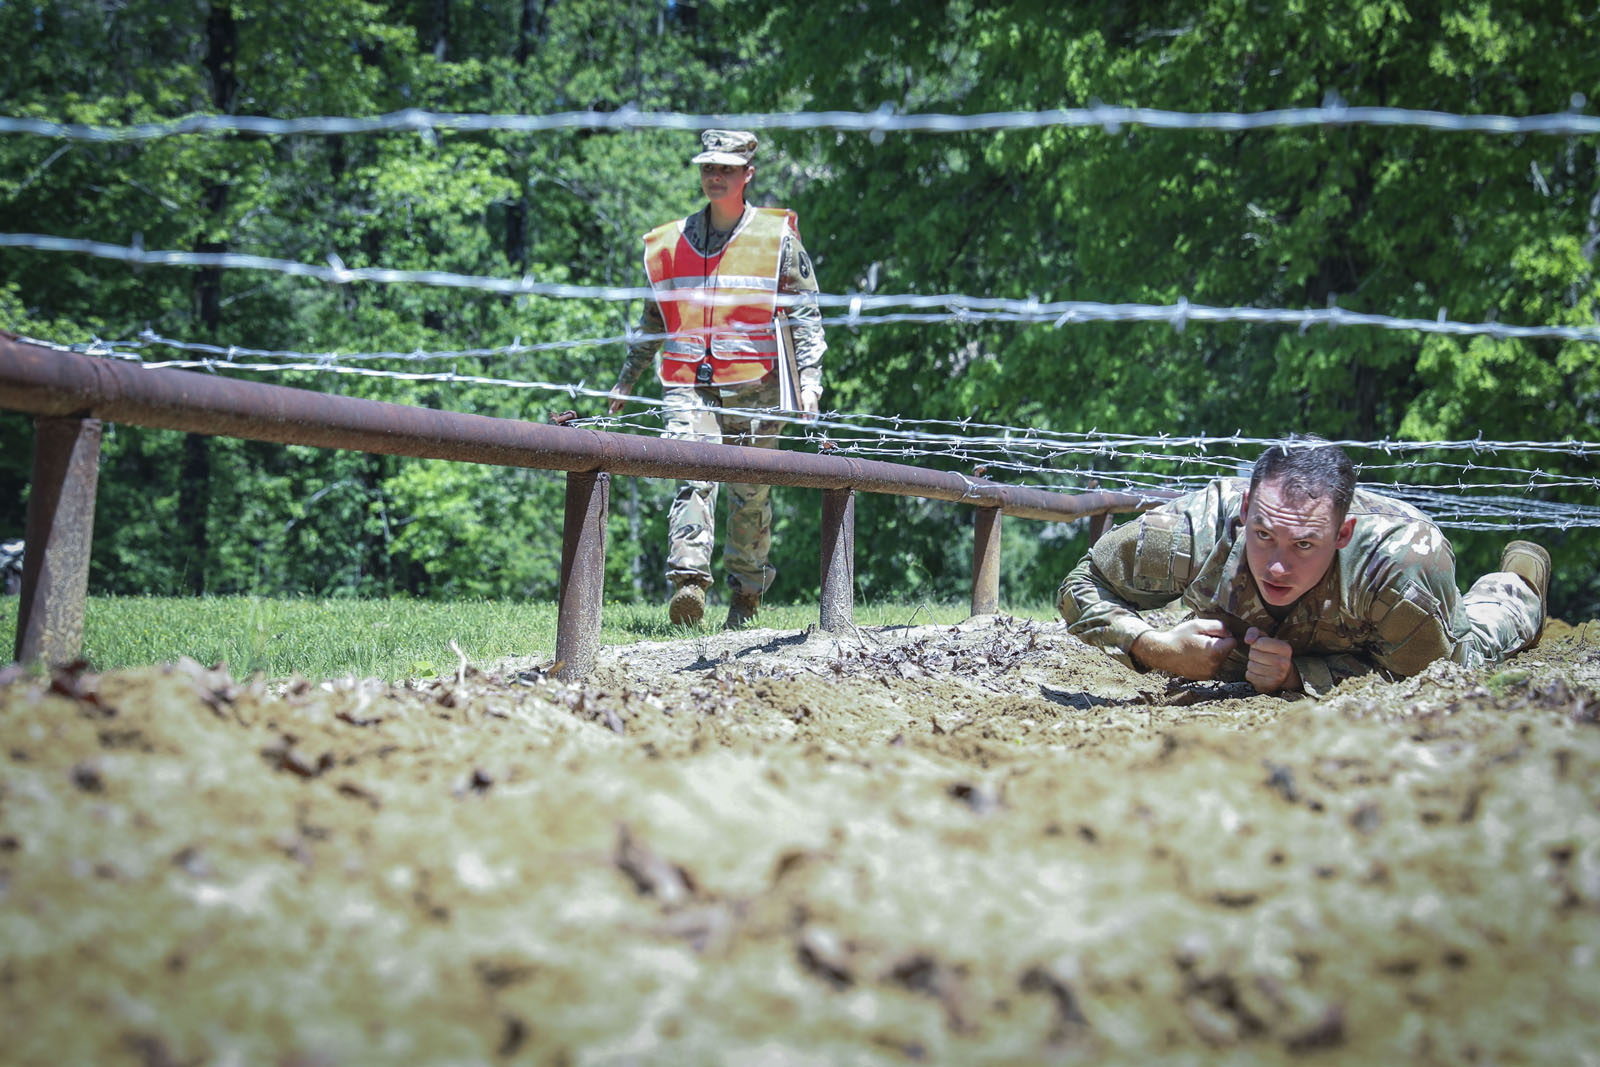 La. Army Guard’s ‘Best Warriors’ compete for honors